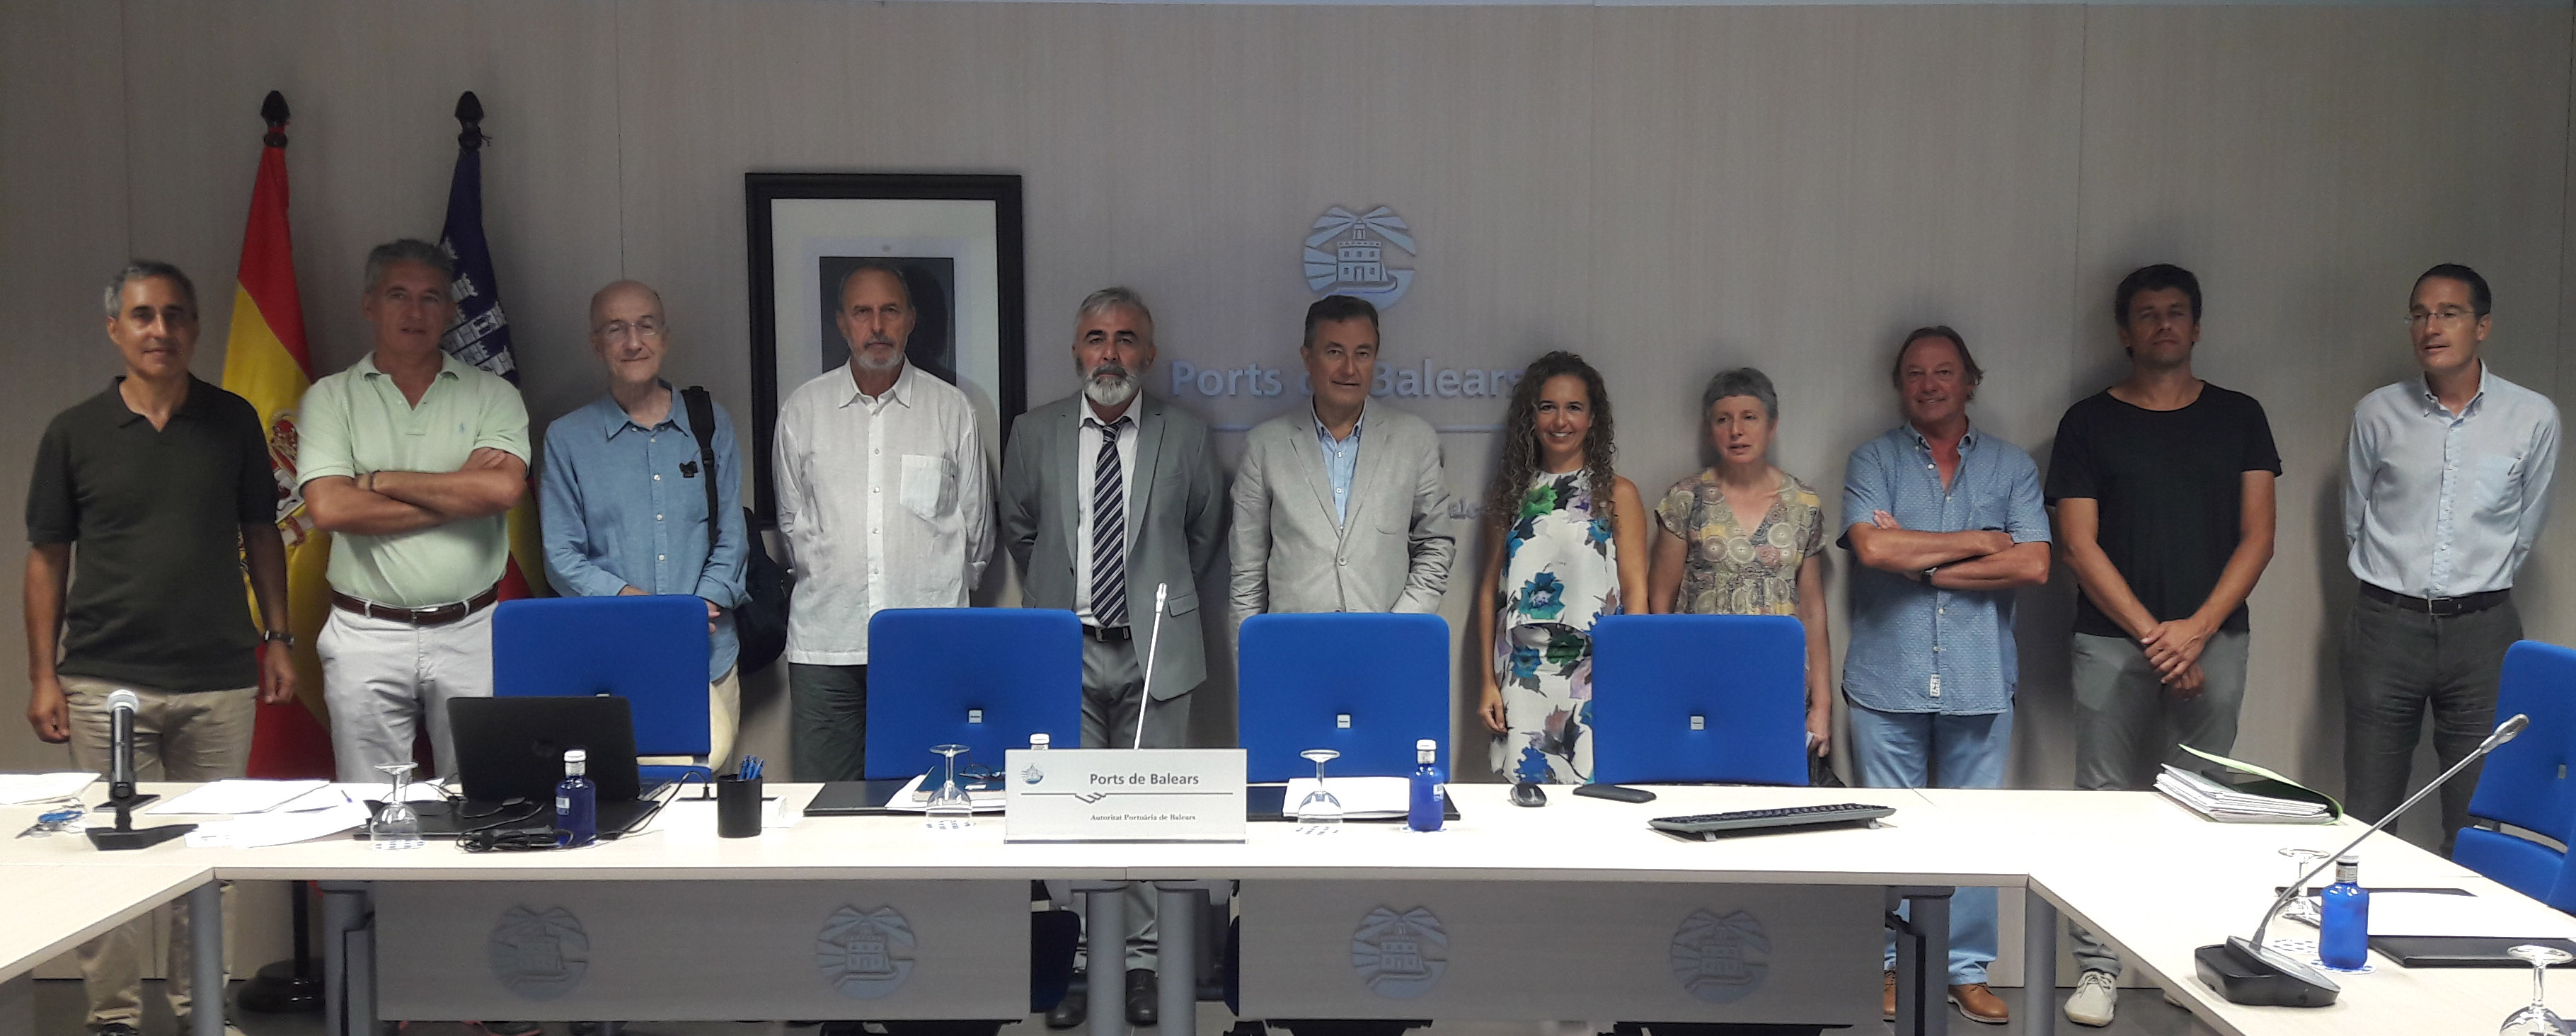 THE PANEL ASSESSES THIRTEEN PROPOSALS SUBMITTED FOR THE IDEAS COMPETITION RELATING TO THE URBAN REDEVELOPMENT OF CONTRAMOLL-MOLLET AT THE PORT OF PALMA.